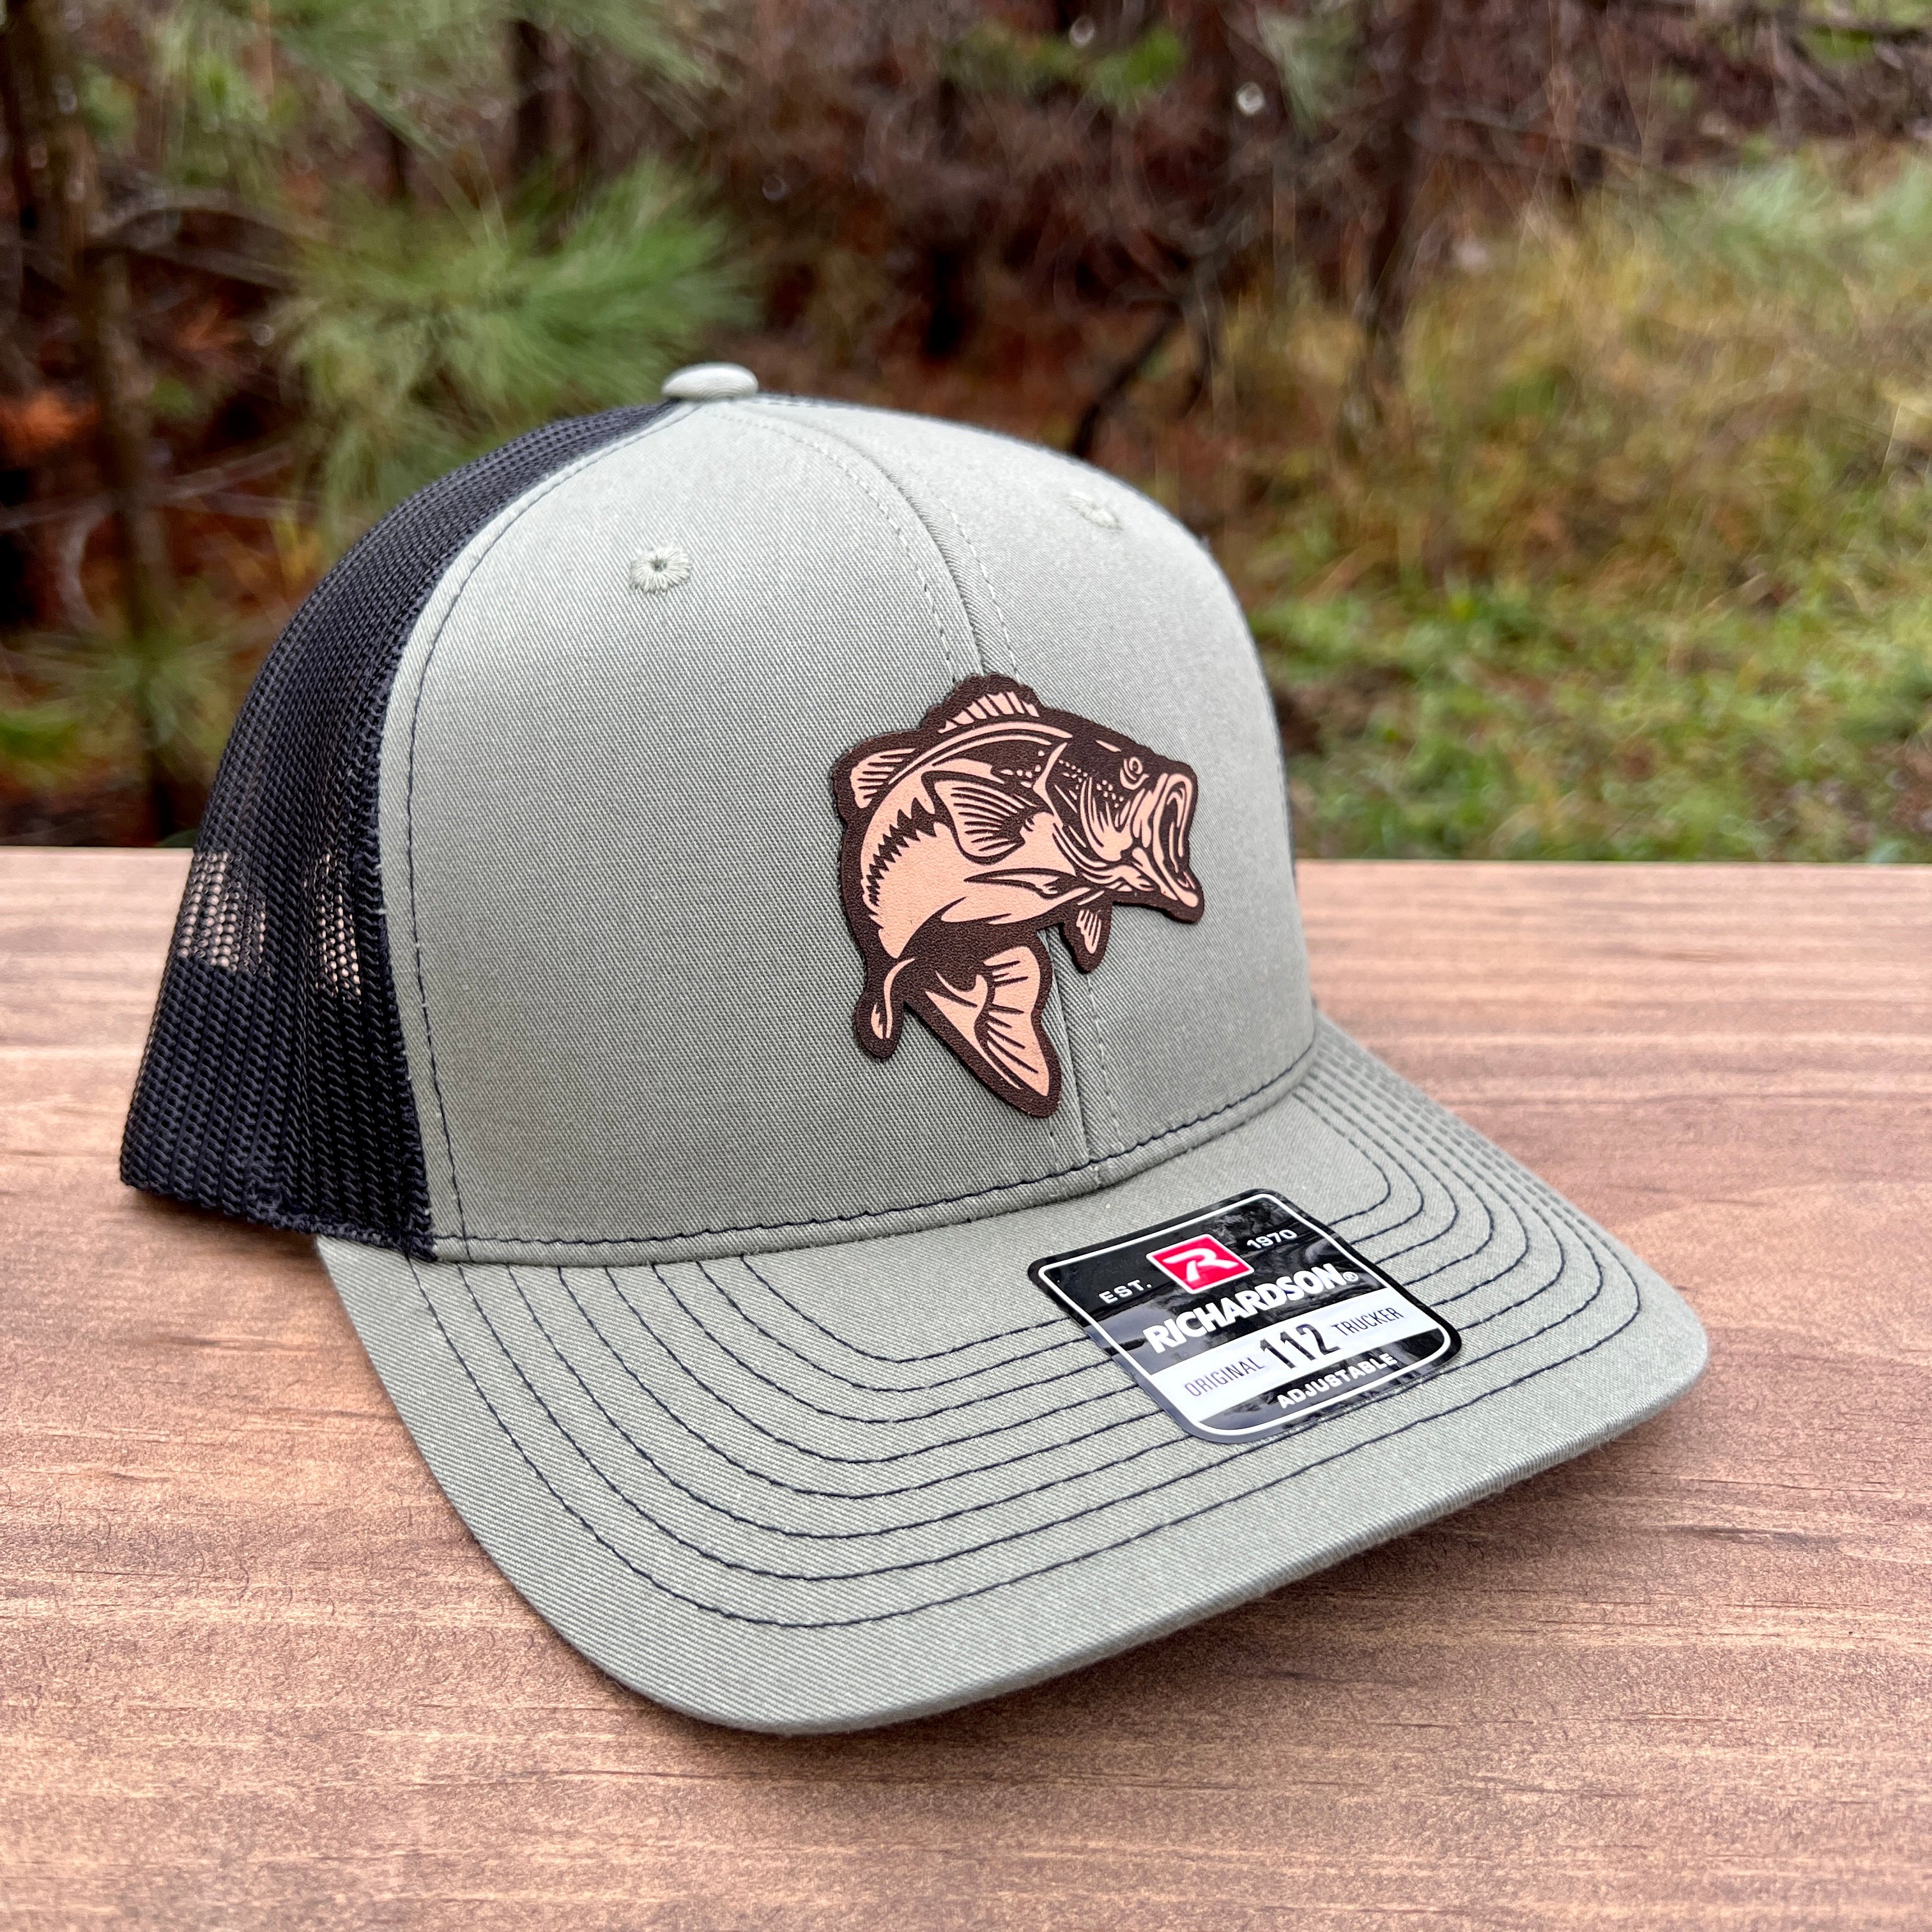  Texas Bass Fishing Texas State Outline Richardson 112 Snap Back  Trucker Hat : Handmade Products